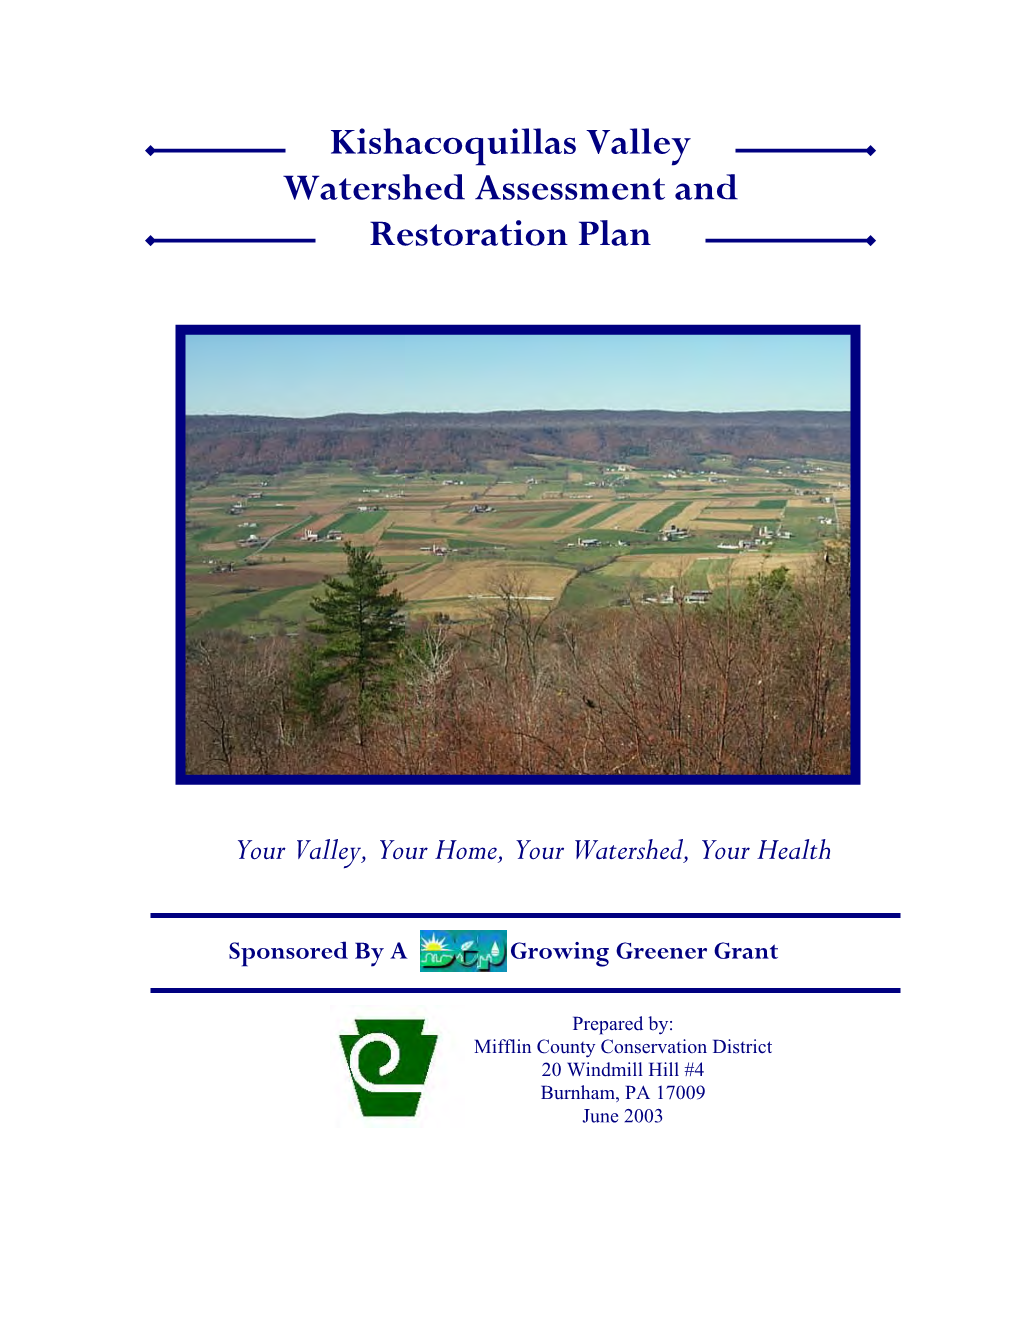 Kishacoquillas Valley Watershed Assessment and Restoration Plan